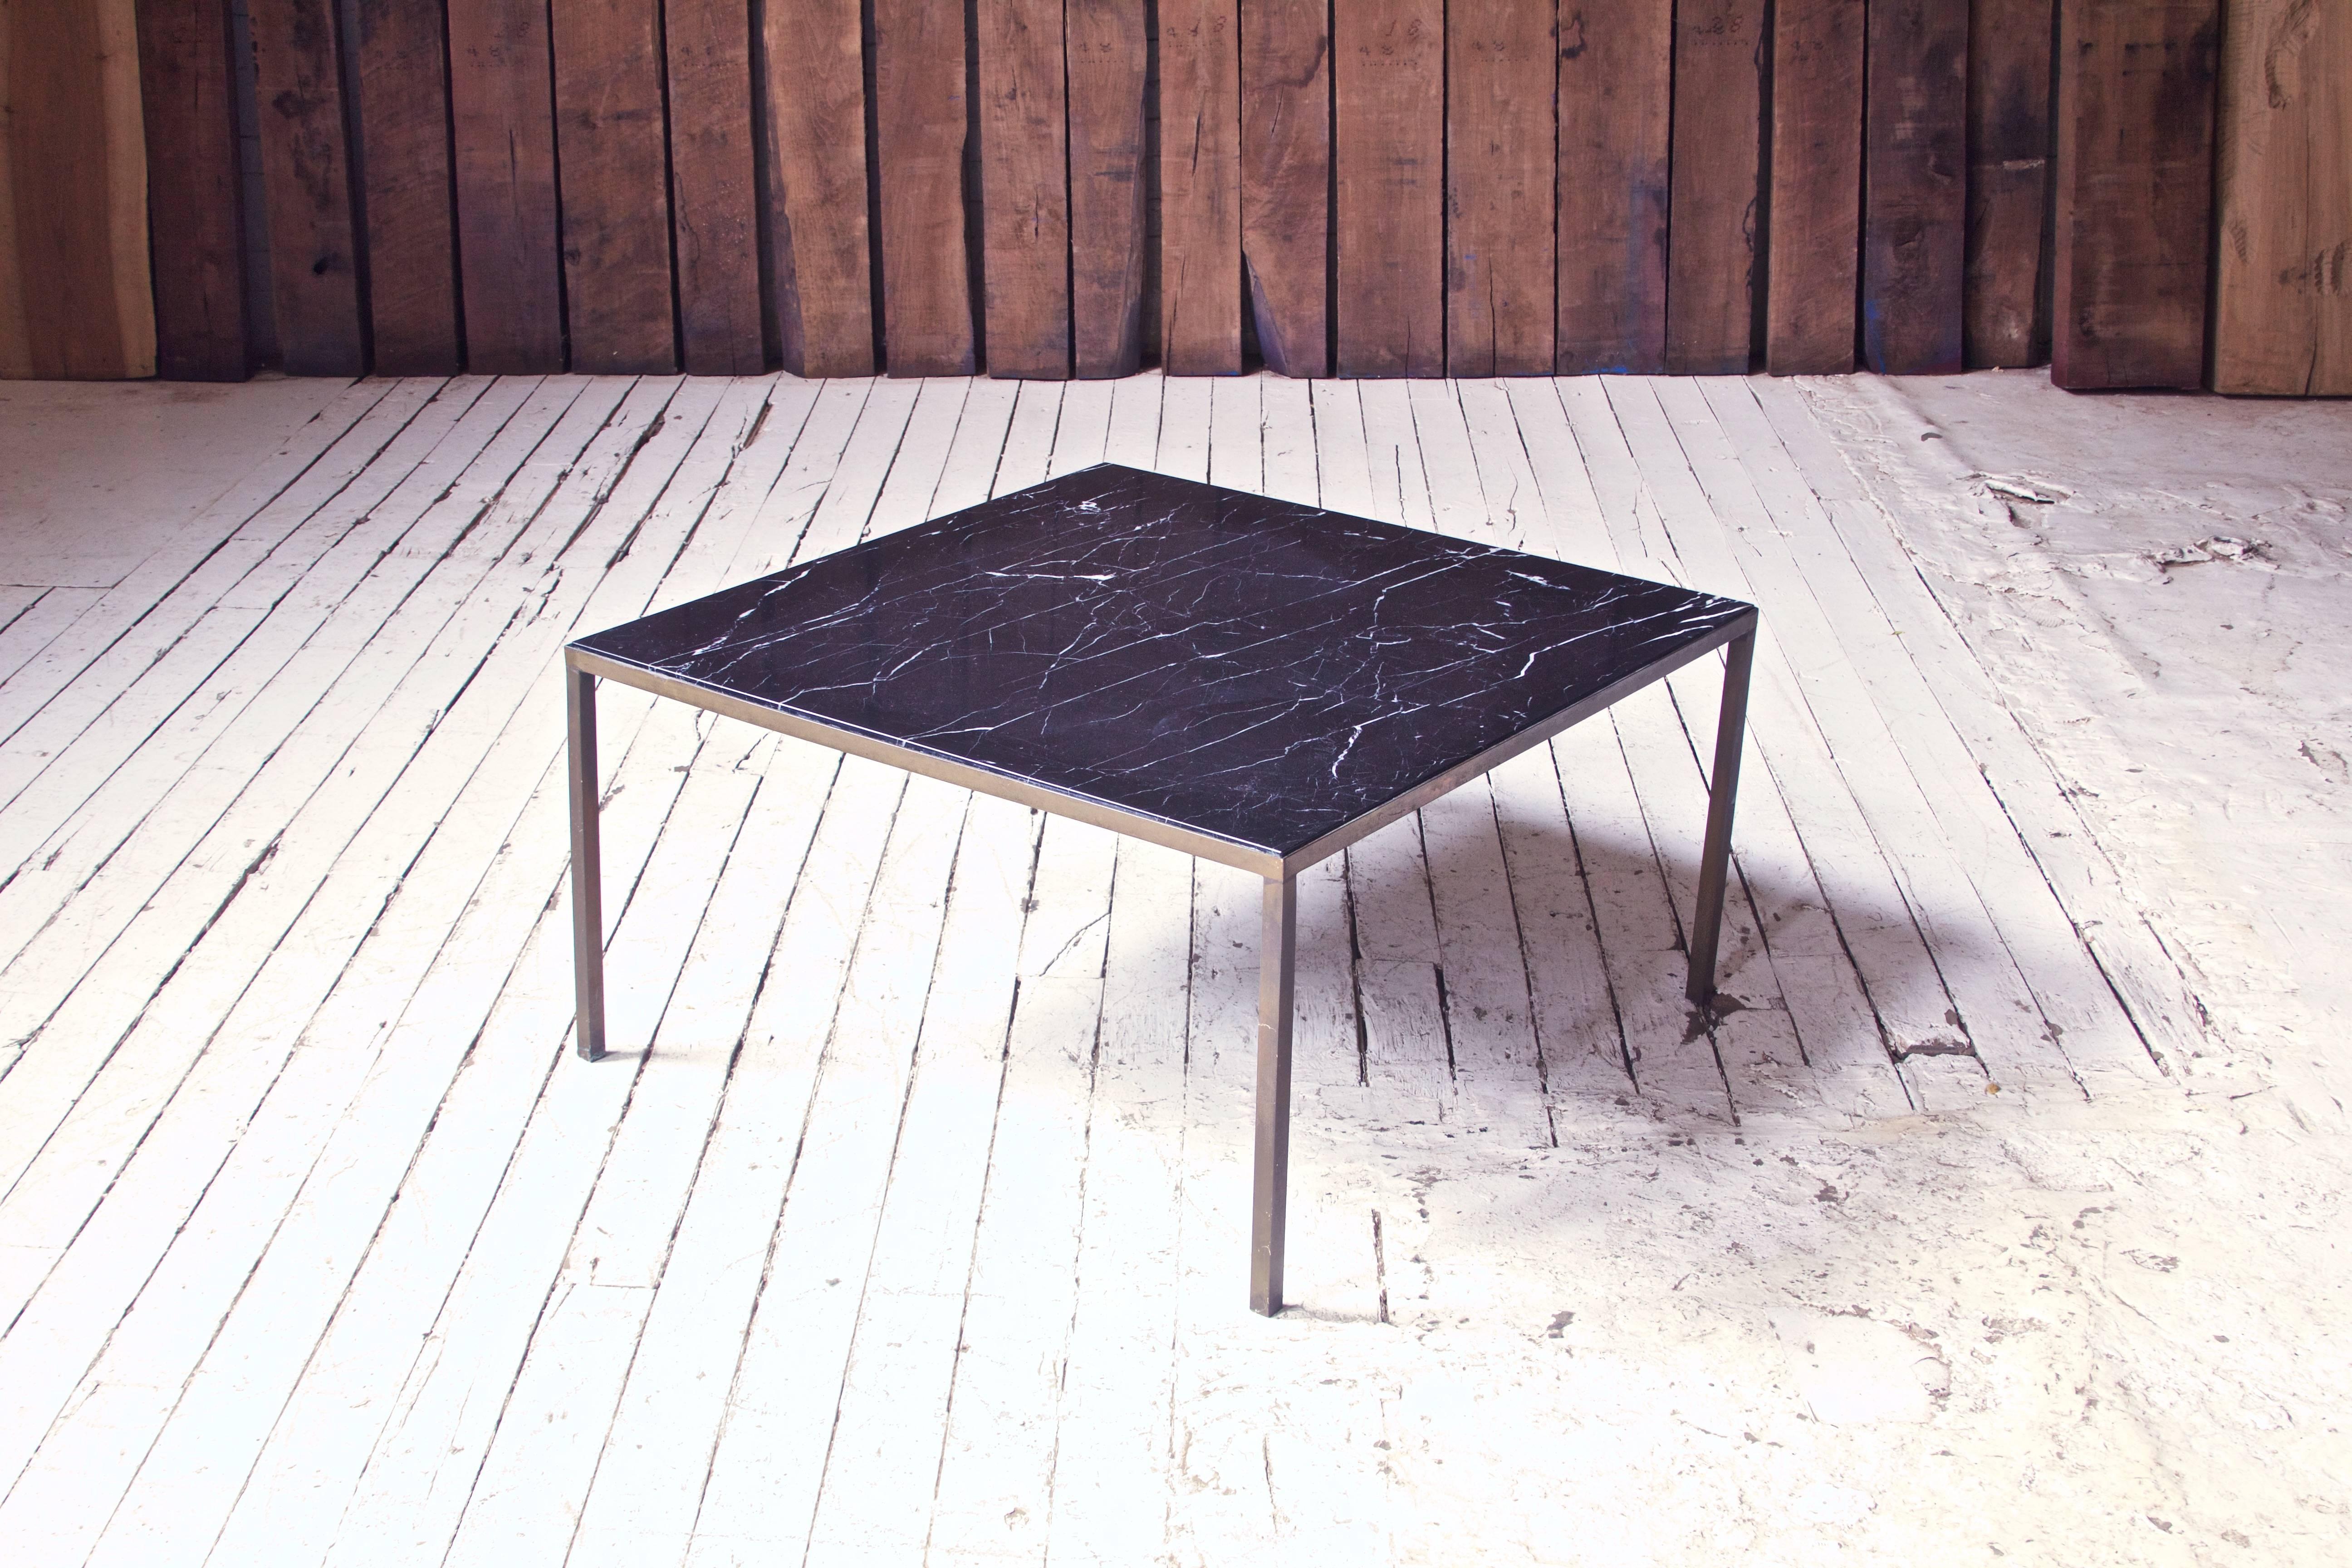 A perfectly unadorned vintage Italian coffee table with stunning polished black marble top and gorgeously patinated welded bronze base.